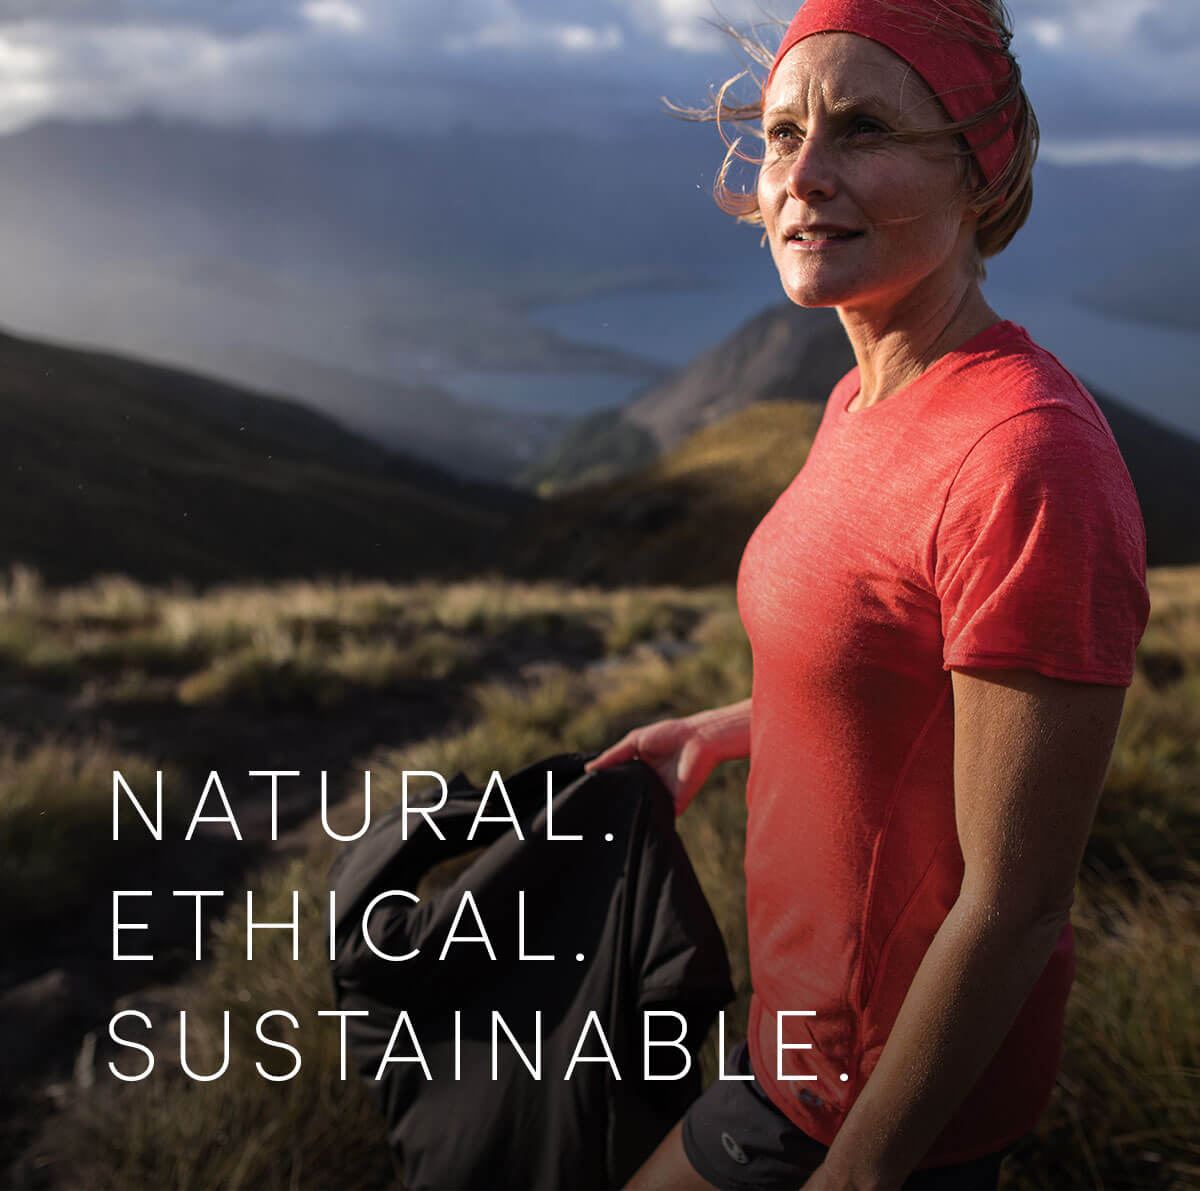 Natural. Ethical. Sustainable.